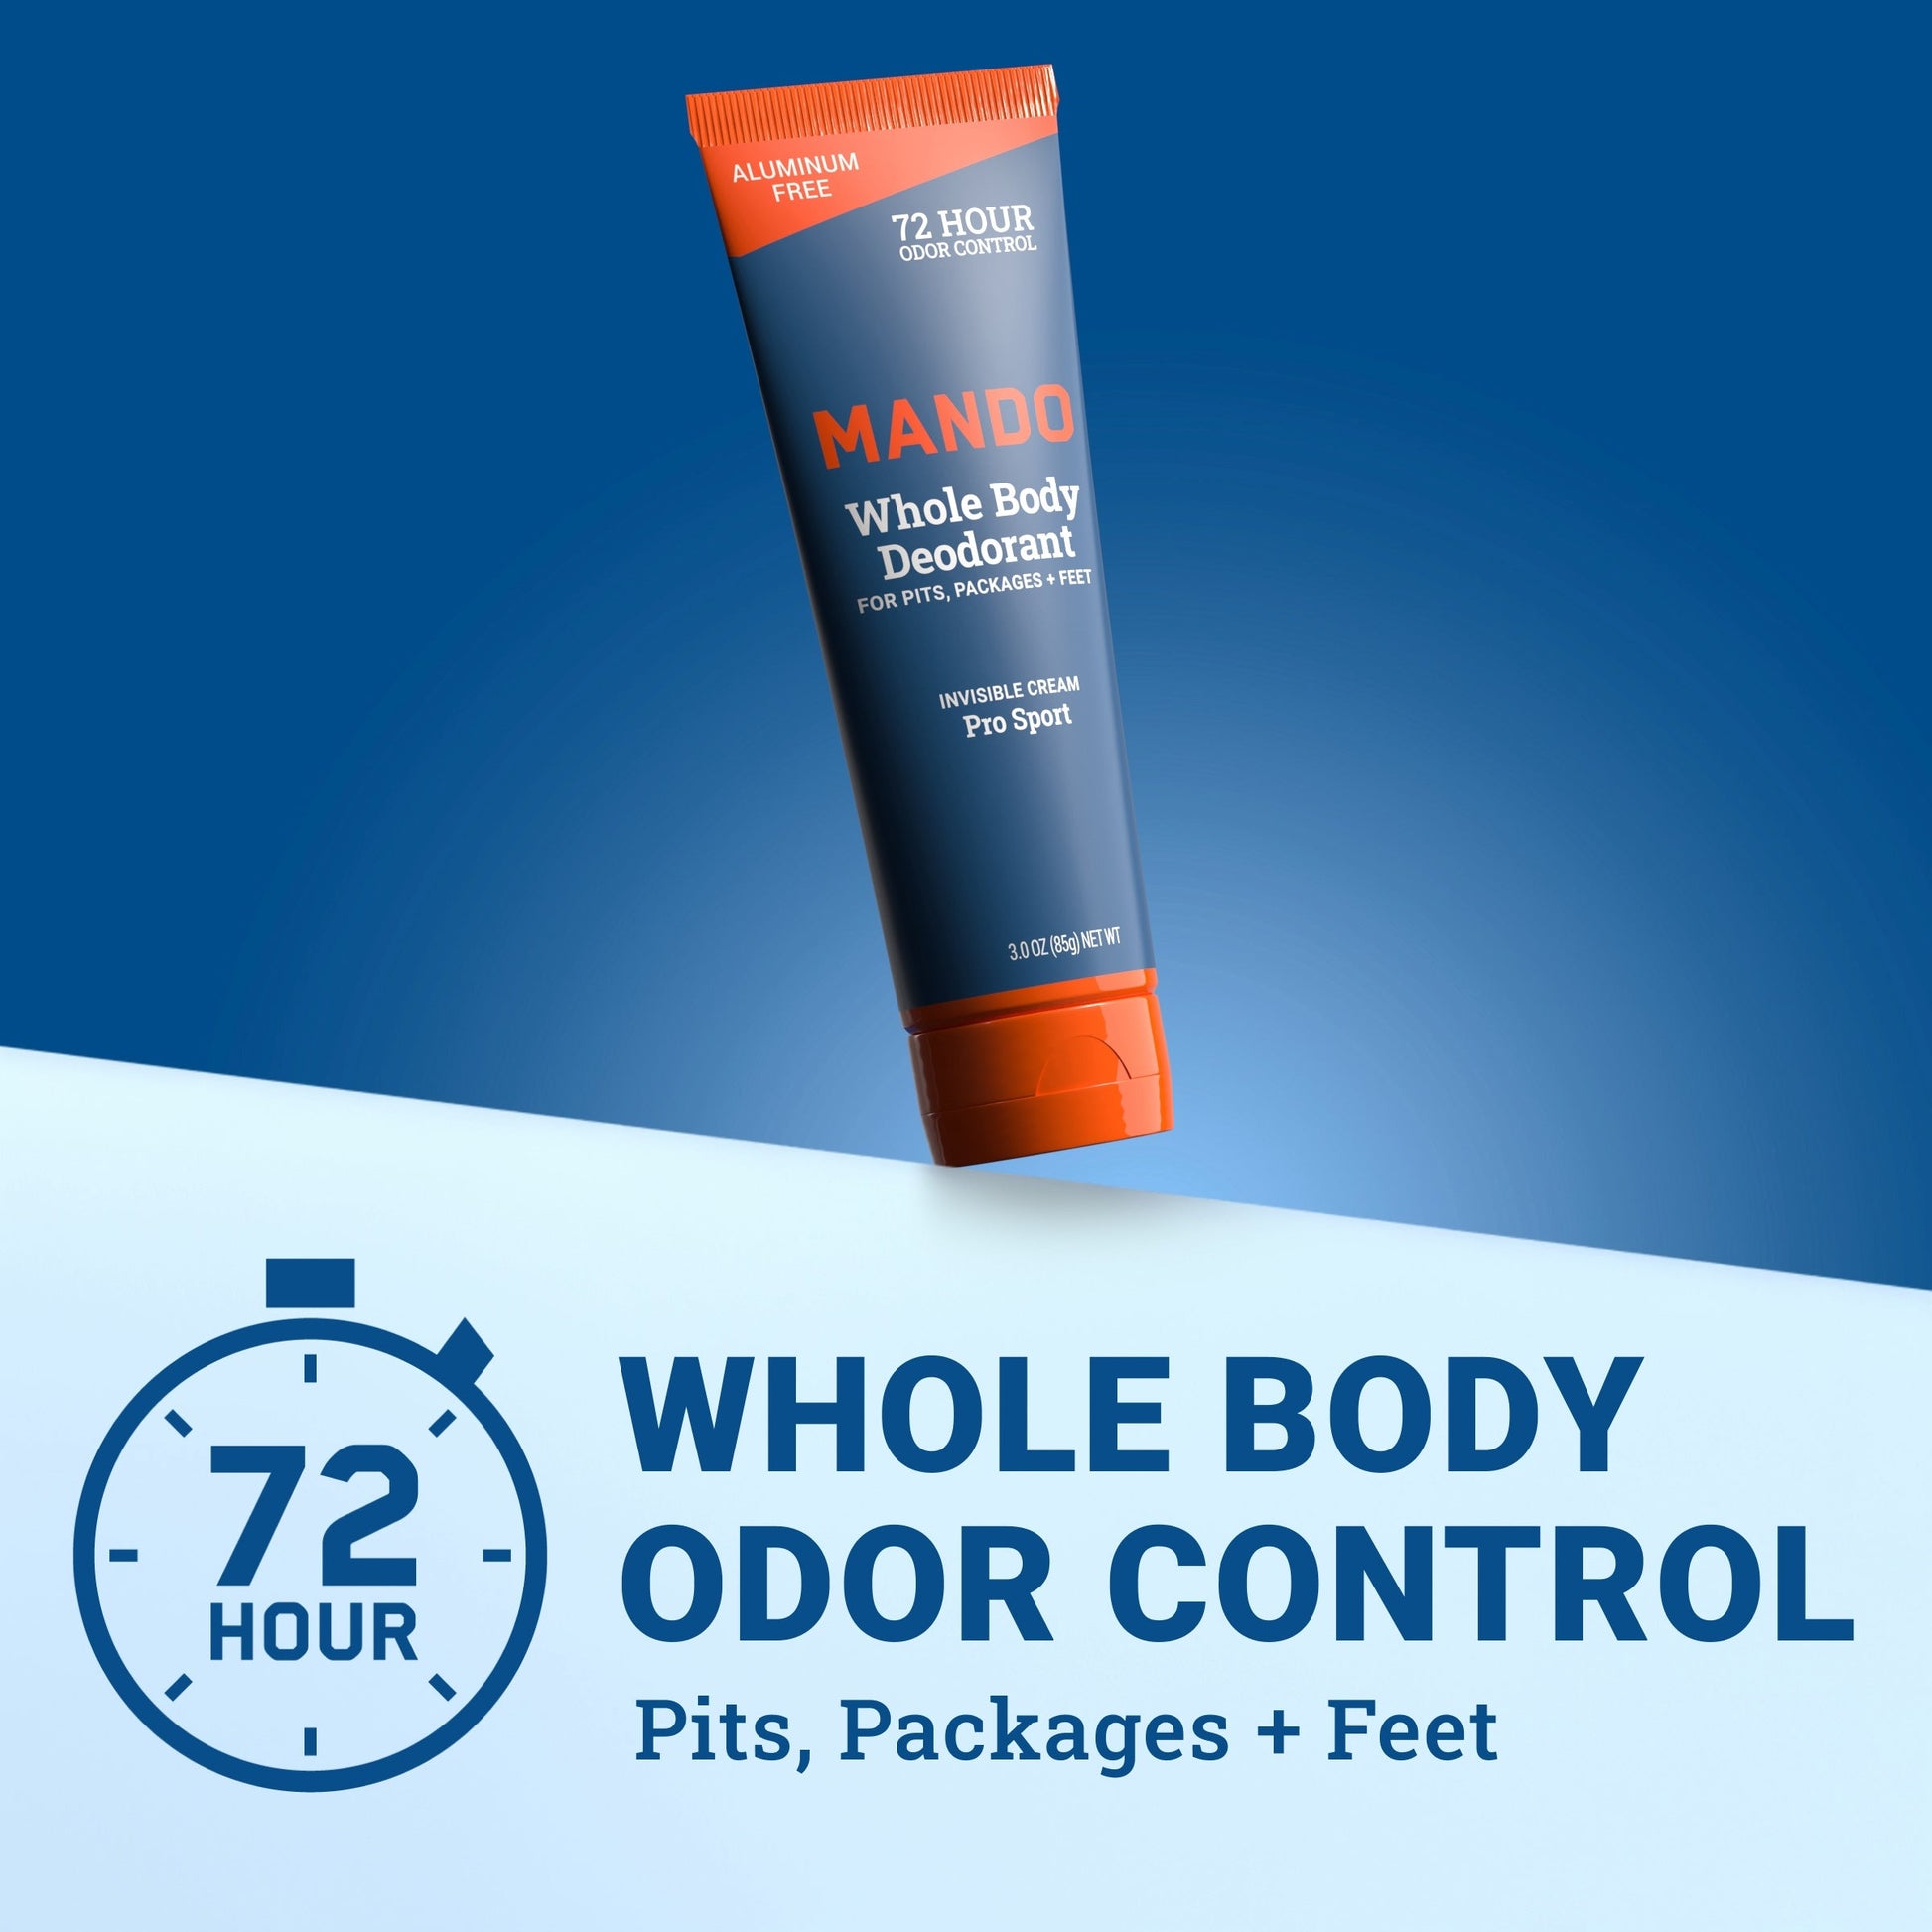 Mando invisible cream deodorant in Pro Sport scent with text: 72 hour whole body odor control, pits, packages + feet